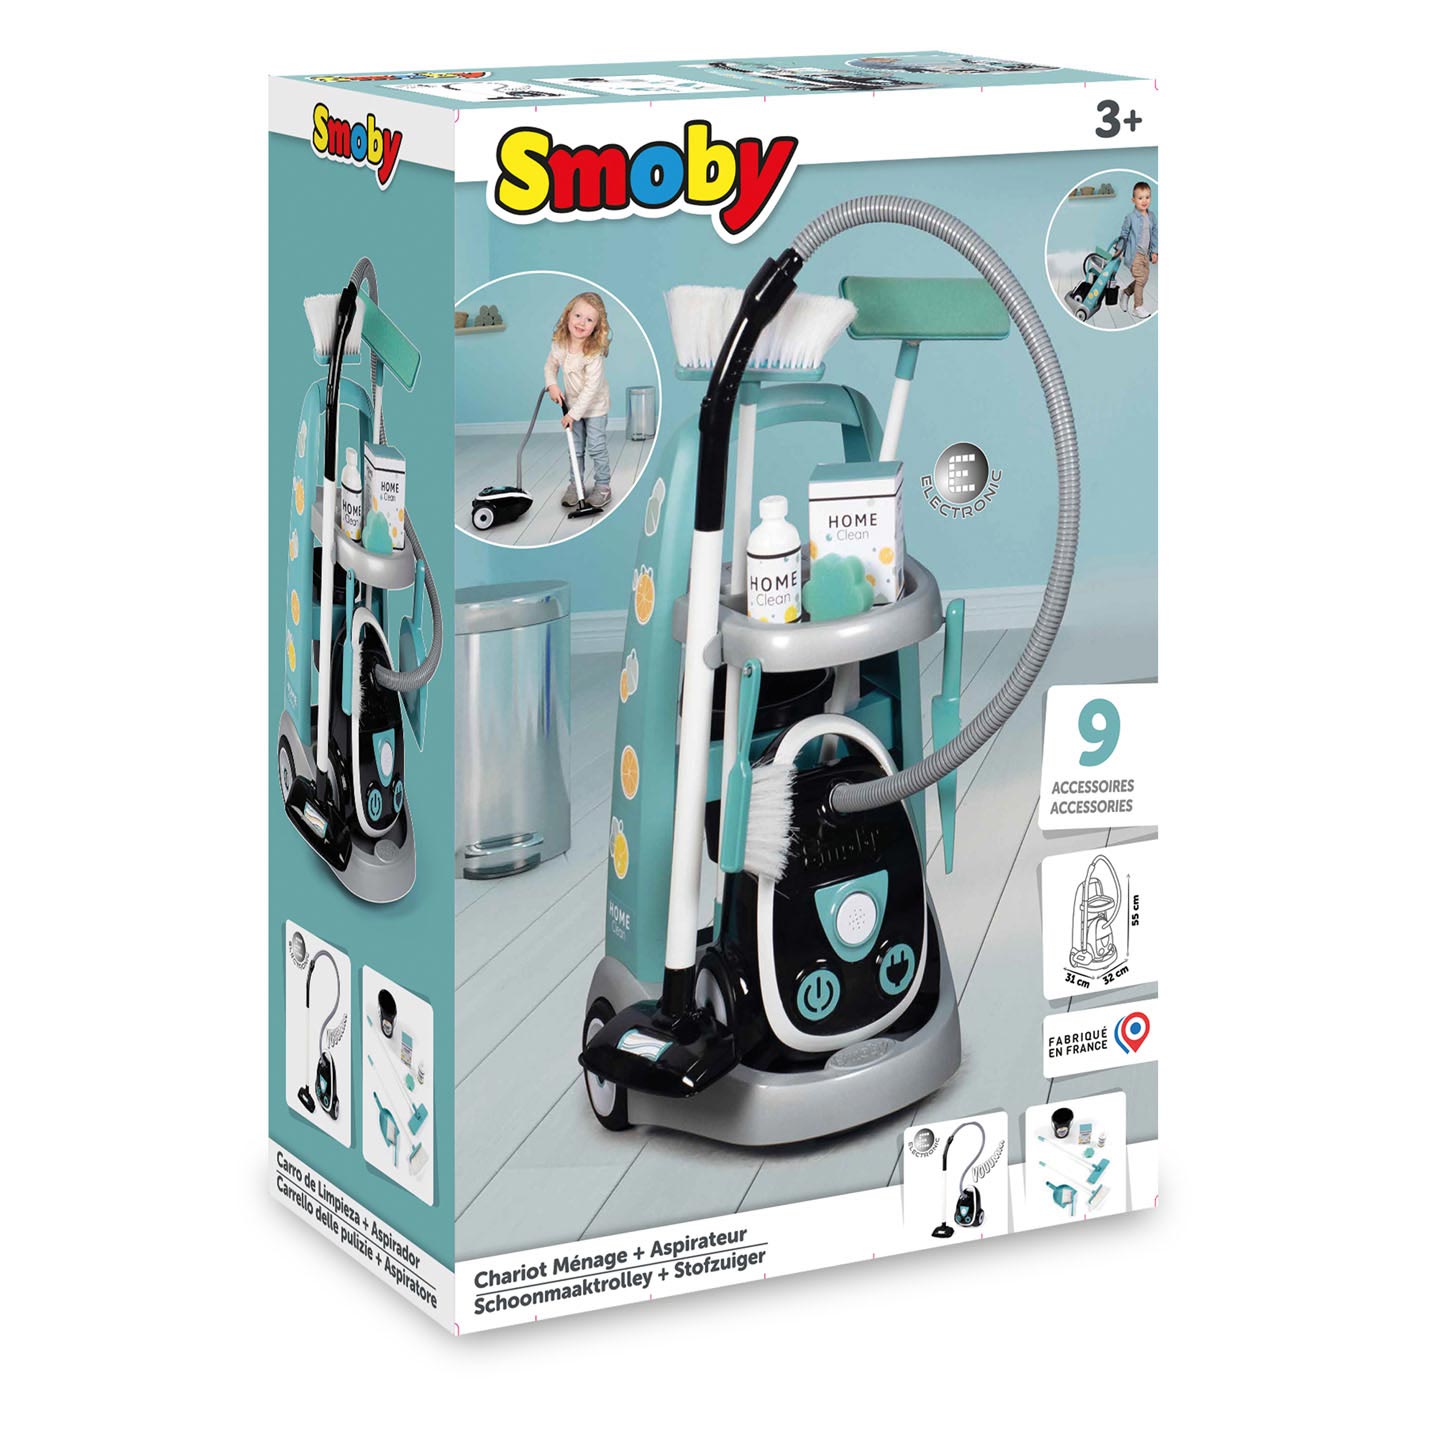 Cleaning vacuum cleaner, Toys 8 with Smoby Thimble pcs. trolley |